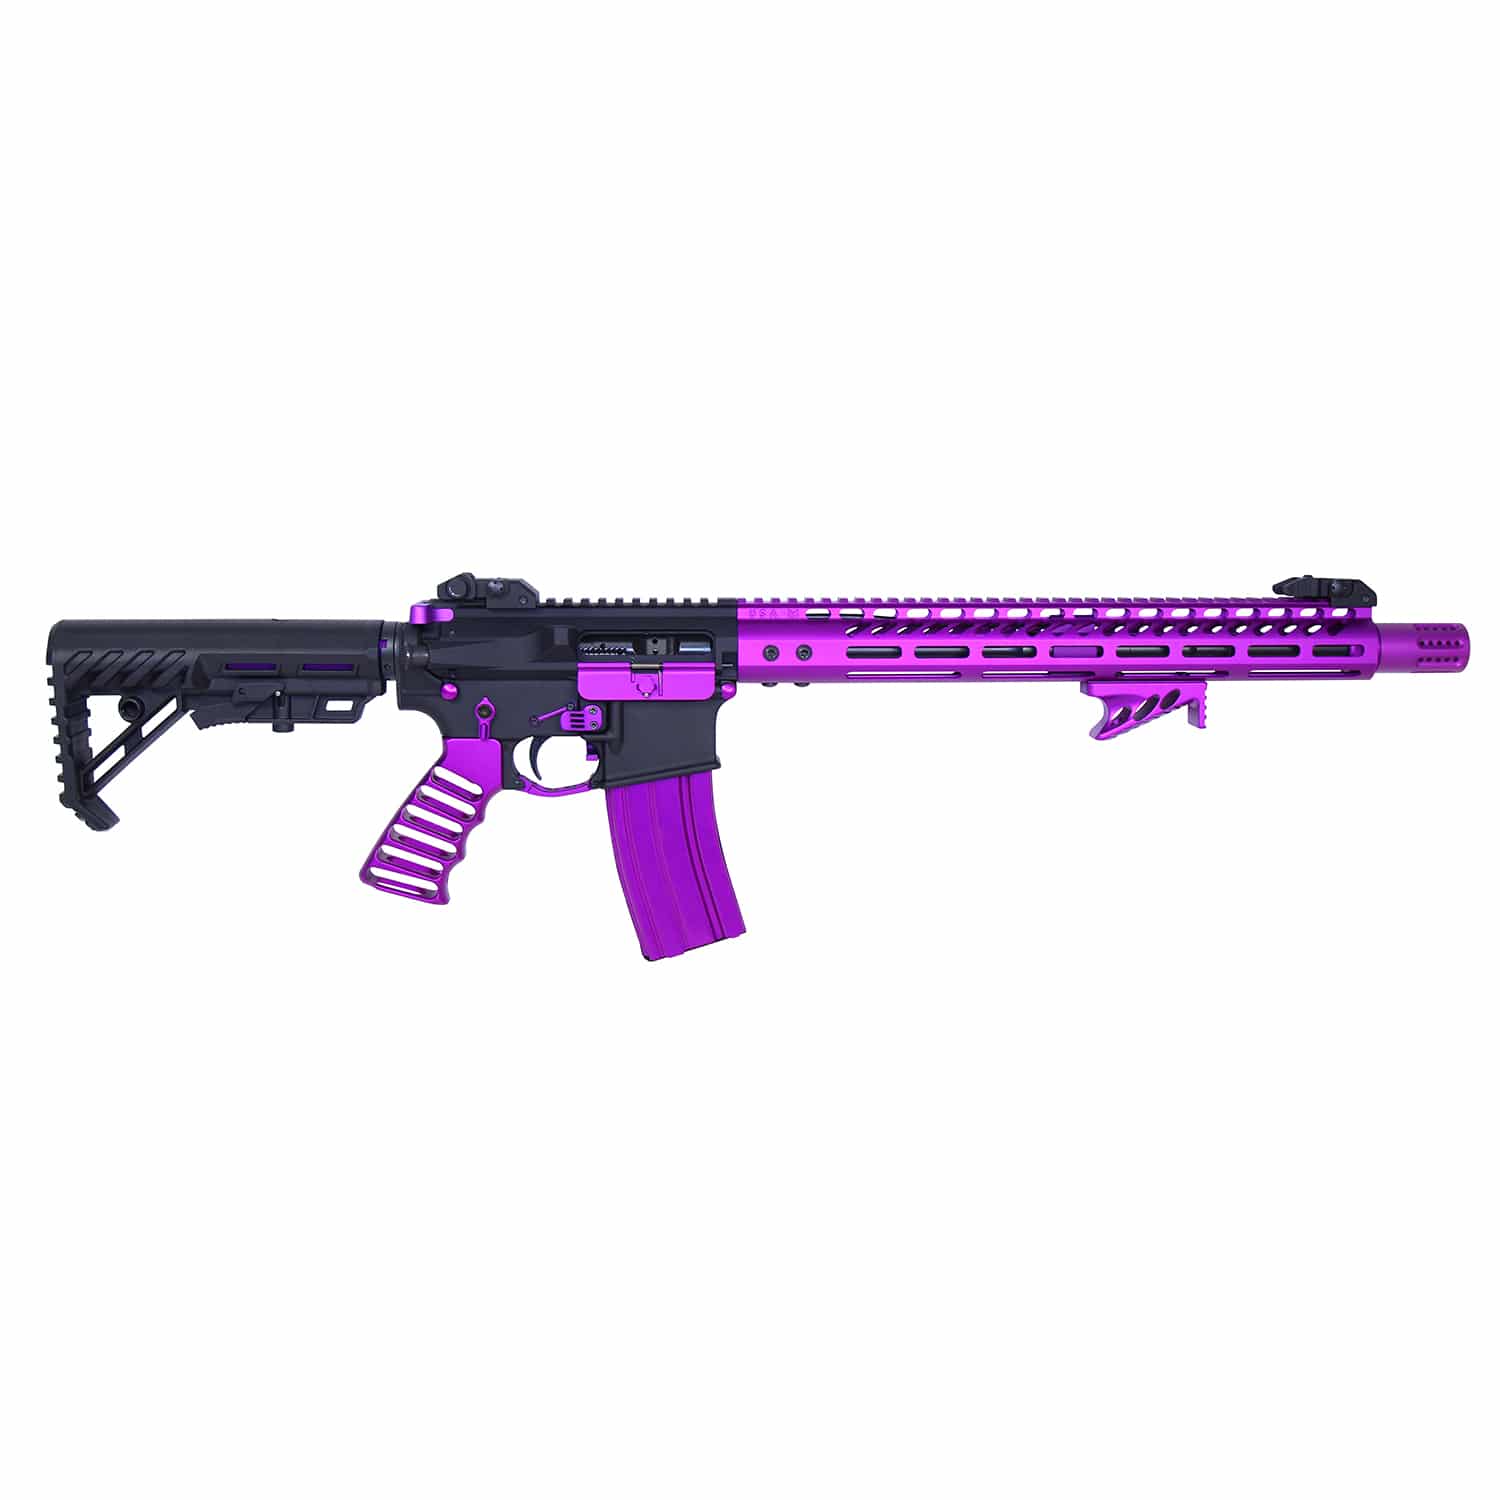 AR-15 Full Rifle Parts Kit in Anodized Purple.